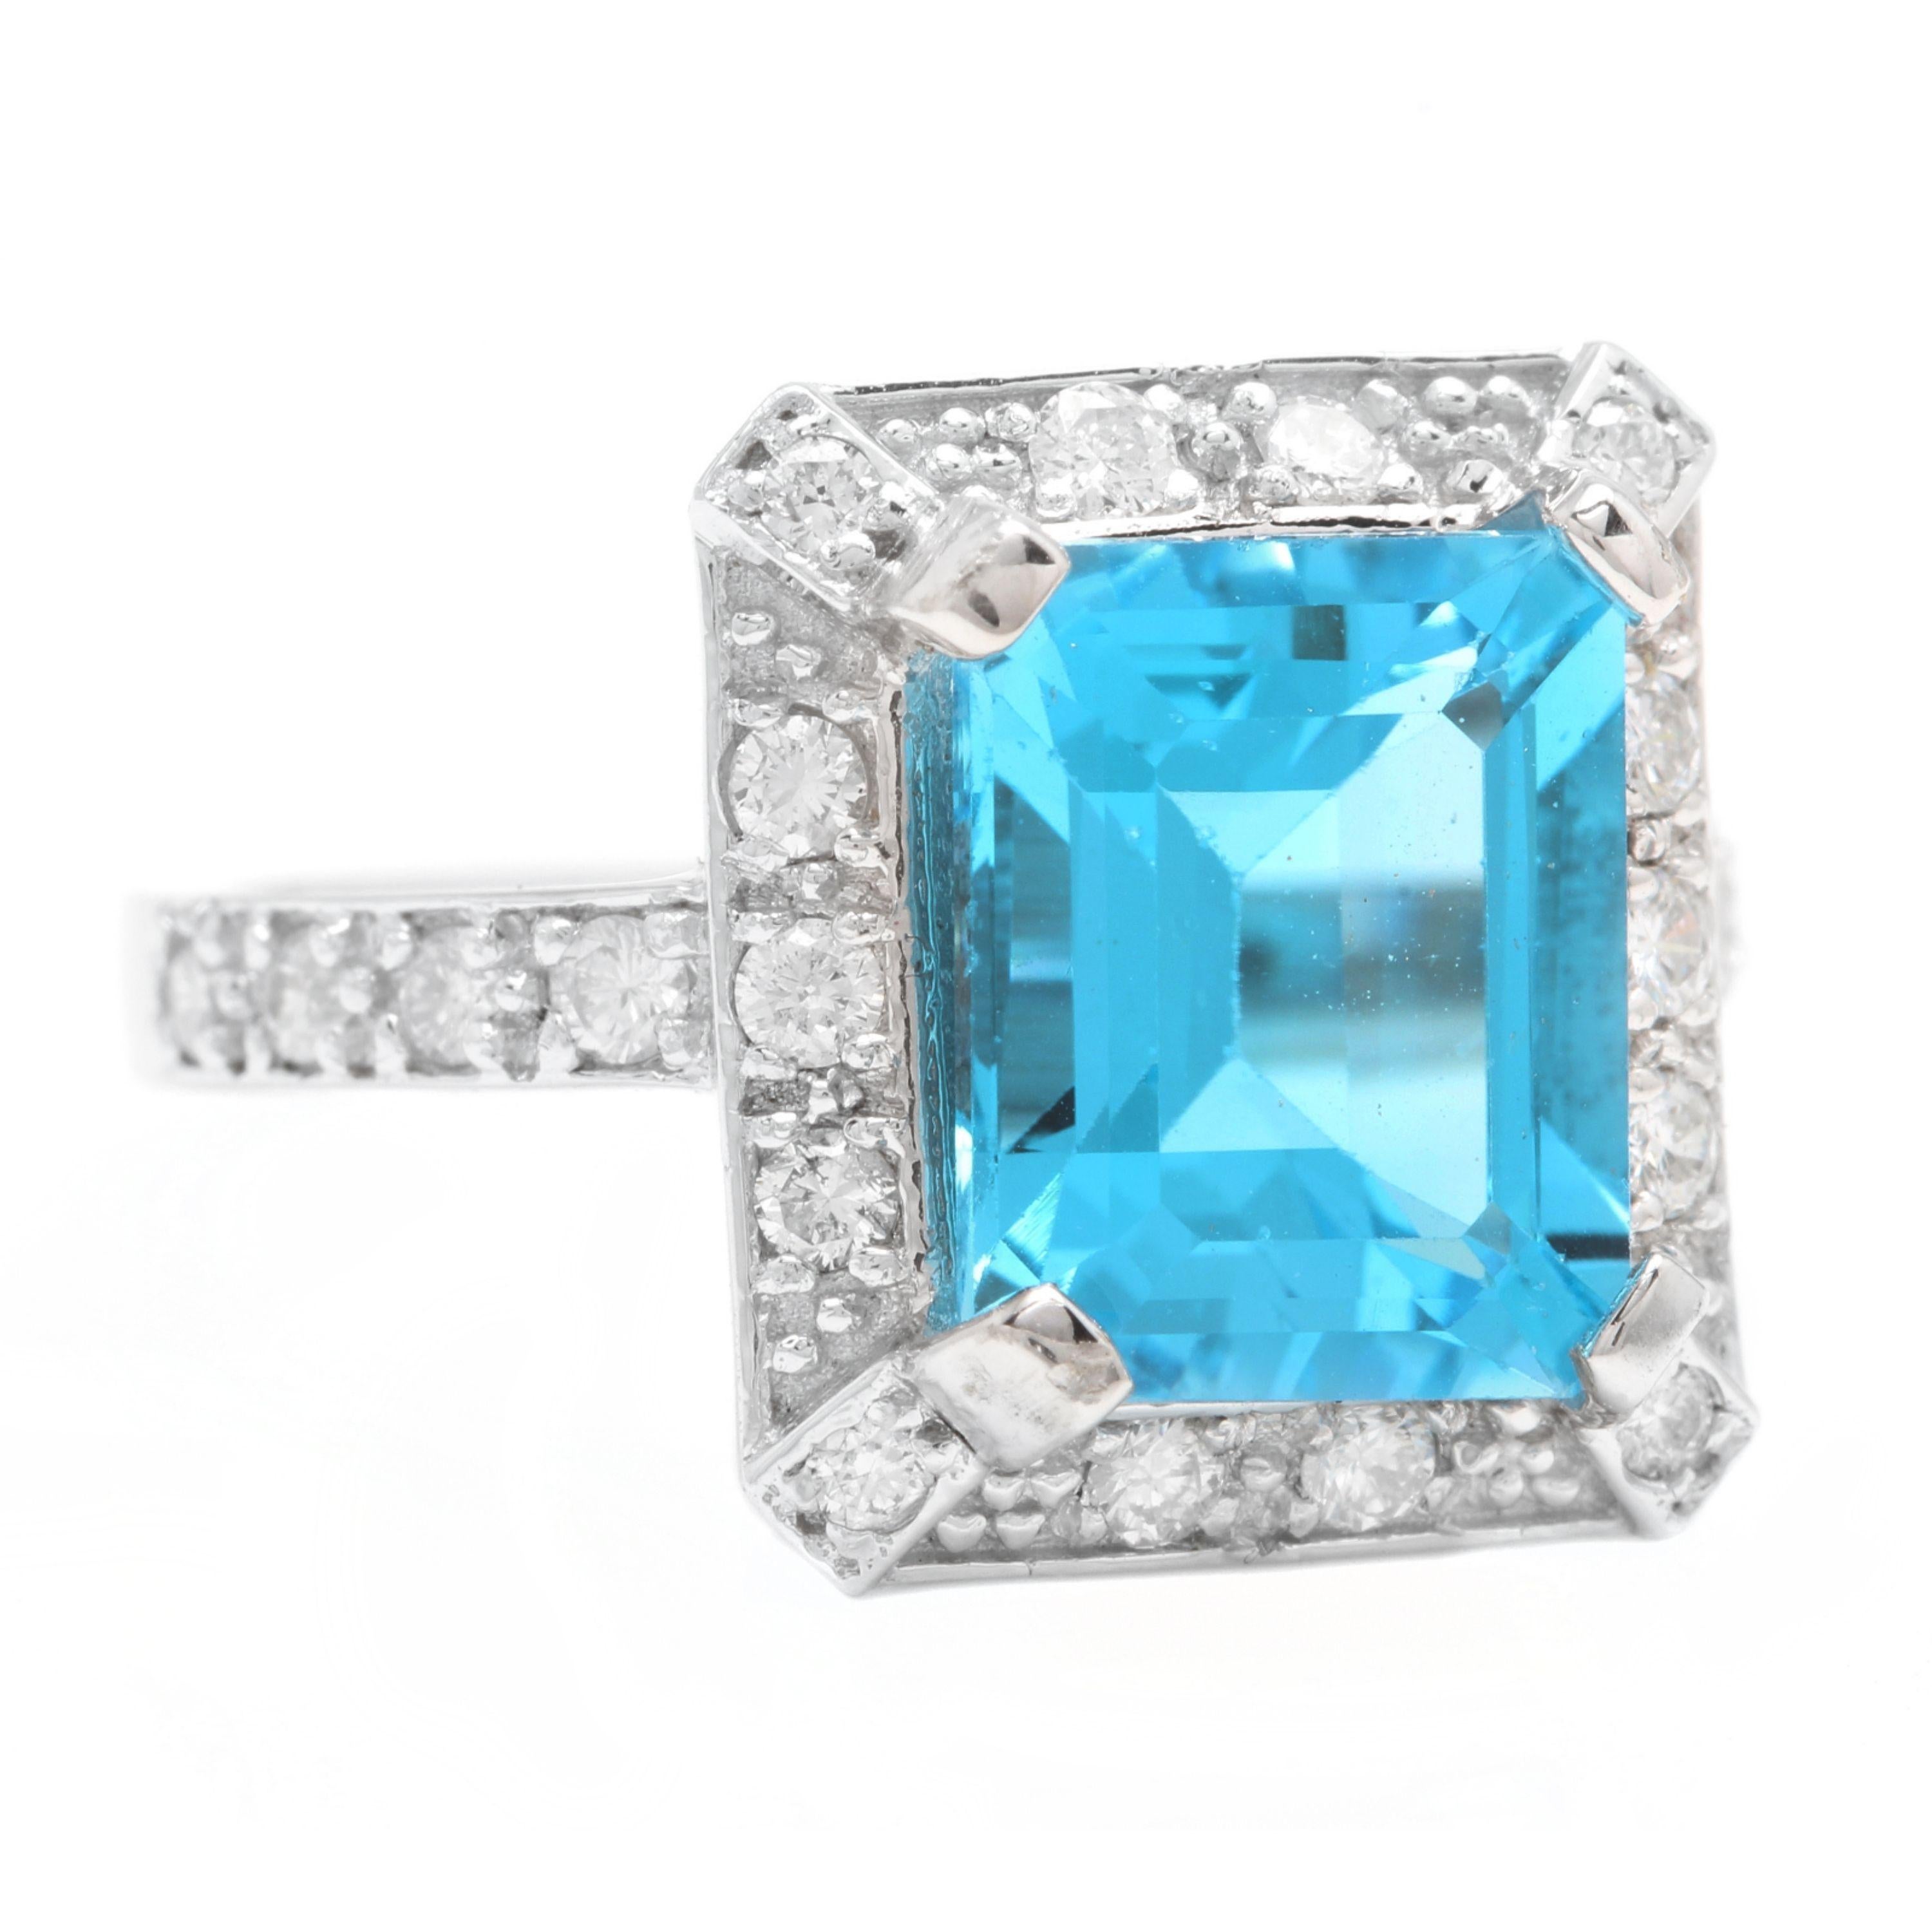 6.60 Carats Impressive Natural Swiss Blue Topaz and Diamond 14K Solid White Gold Ring

Total Swiss Topaz Weight is: Approx. 6.00 Carats

Topaz Treatment: Heating

Topaz Measures: Approx. 11.00 x 9.00mm

Natural Round Diamonds Weight: Approx. 0.60